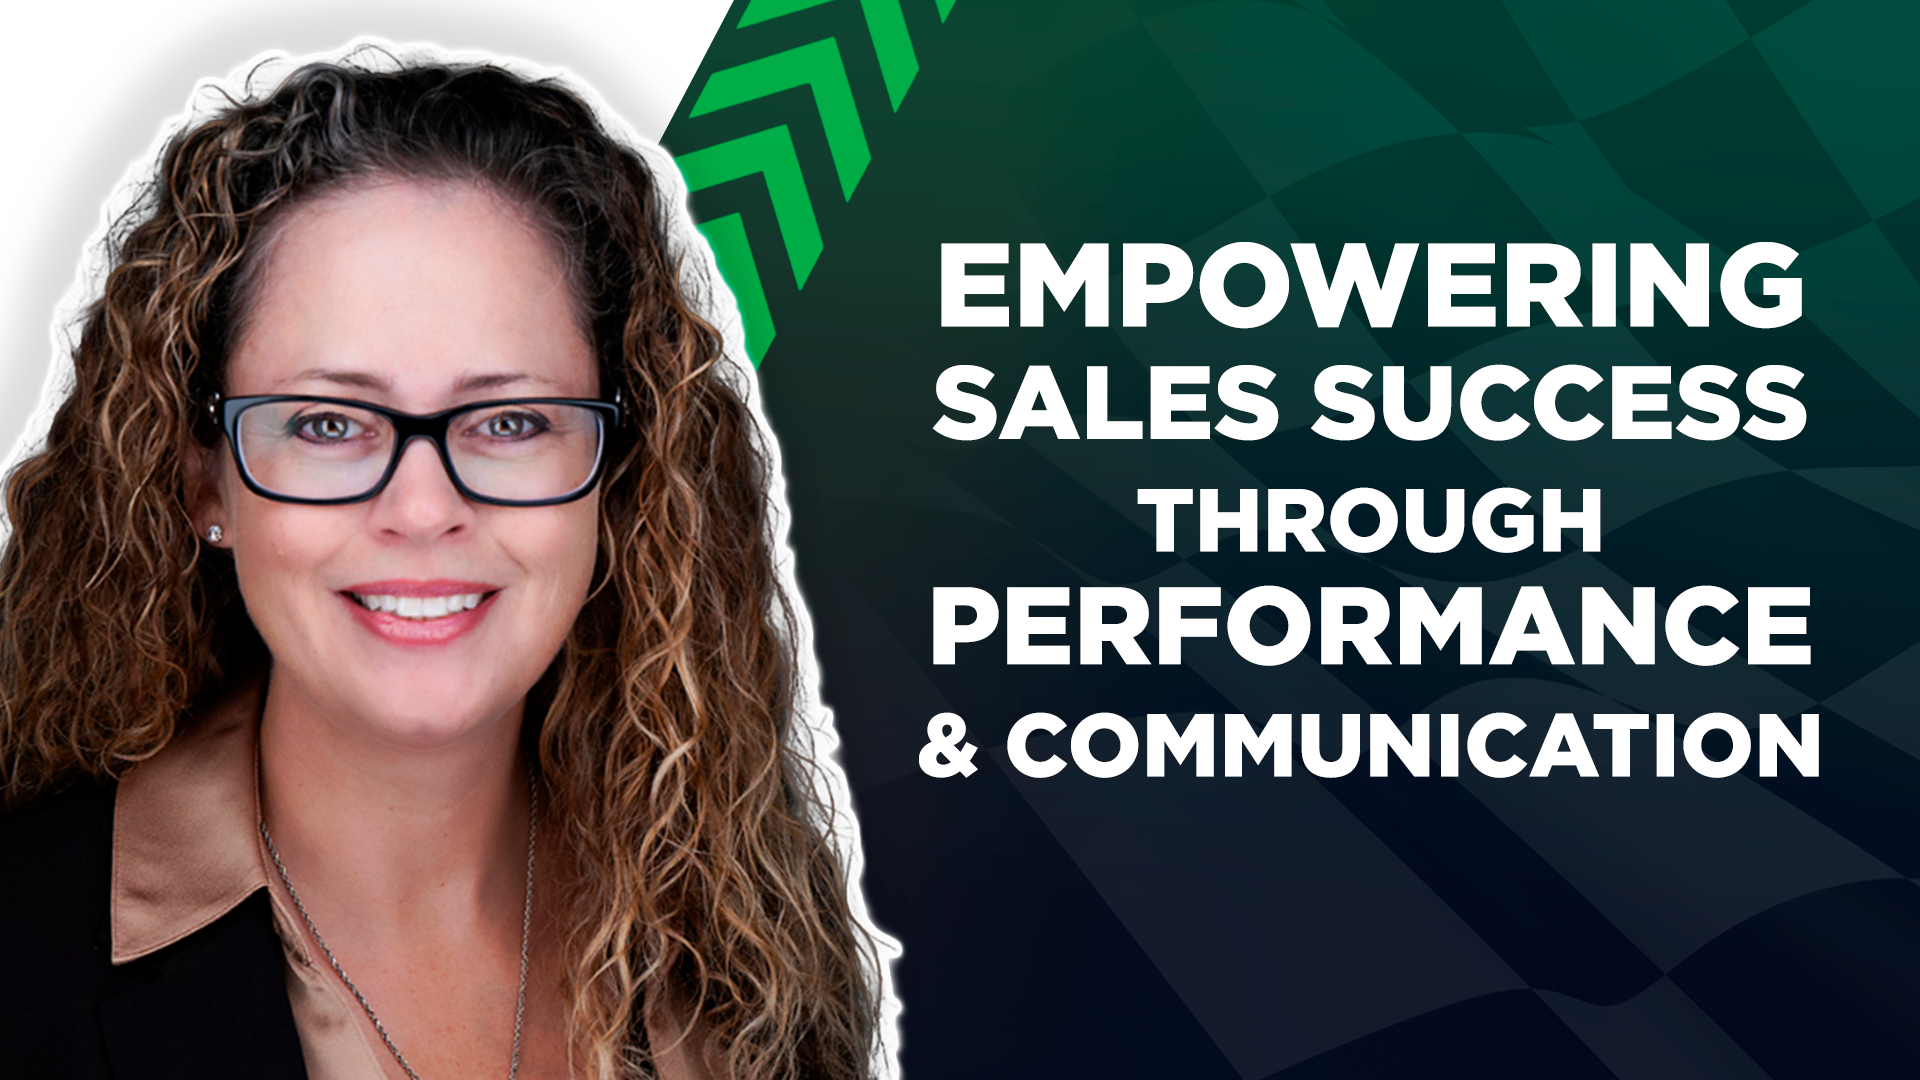 Podcast Pit Stop: Sandy Robinson on Empowering Sales Success Through Performance and Communication